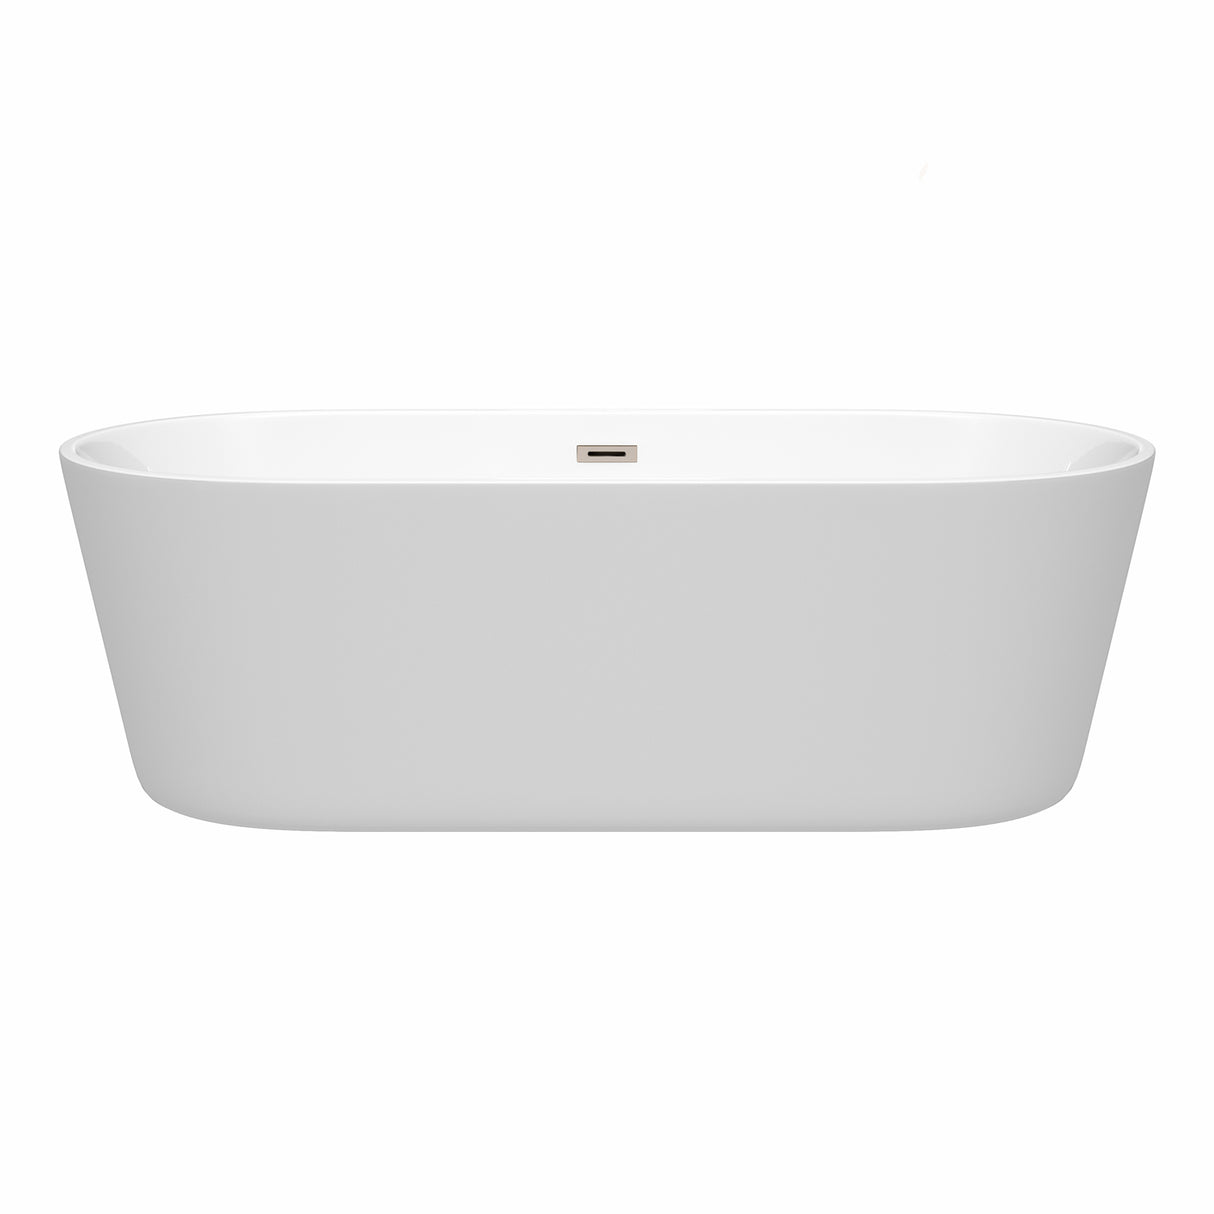 Carissa 71 Inch Freestanding Bathtub in White with Brushed Nickel Drain and Overflow Trim